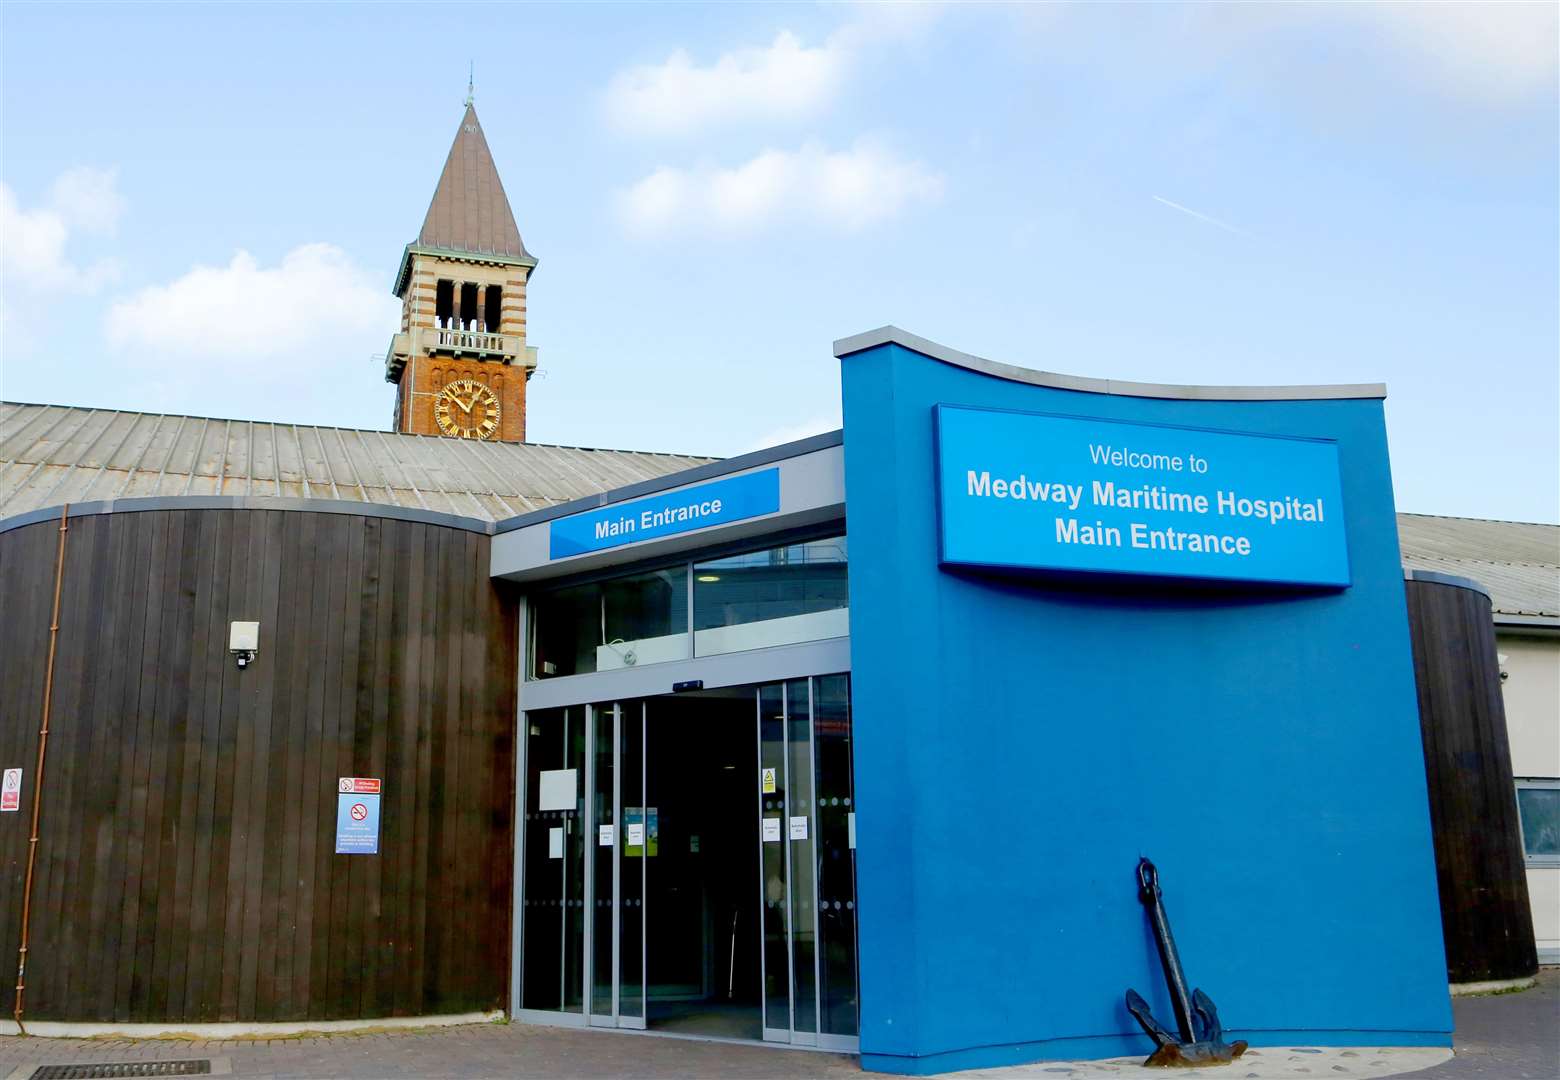 A woman suffered injuries in an incident at Medway Maritime Hospital